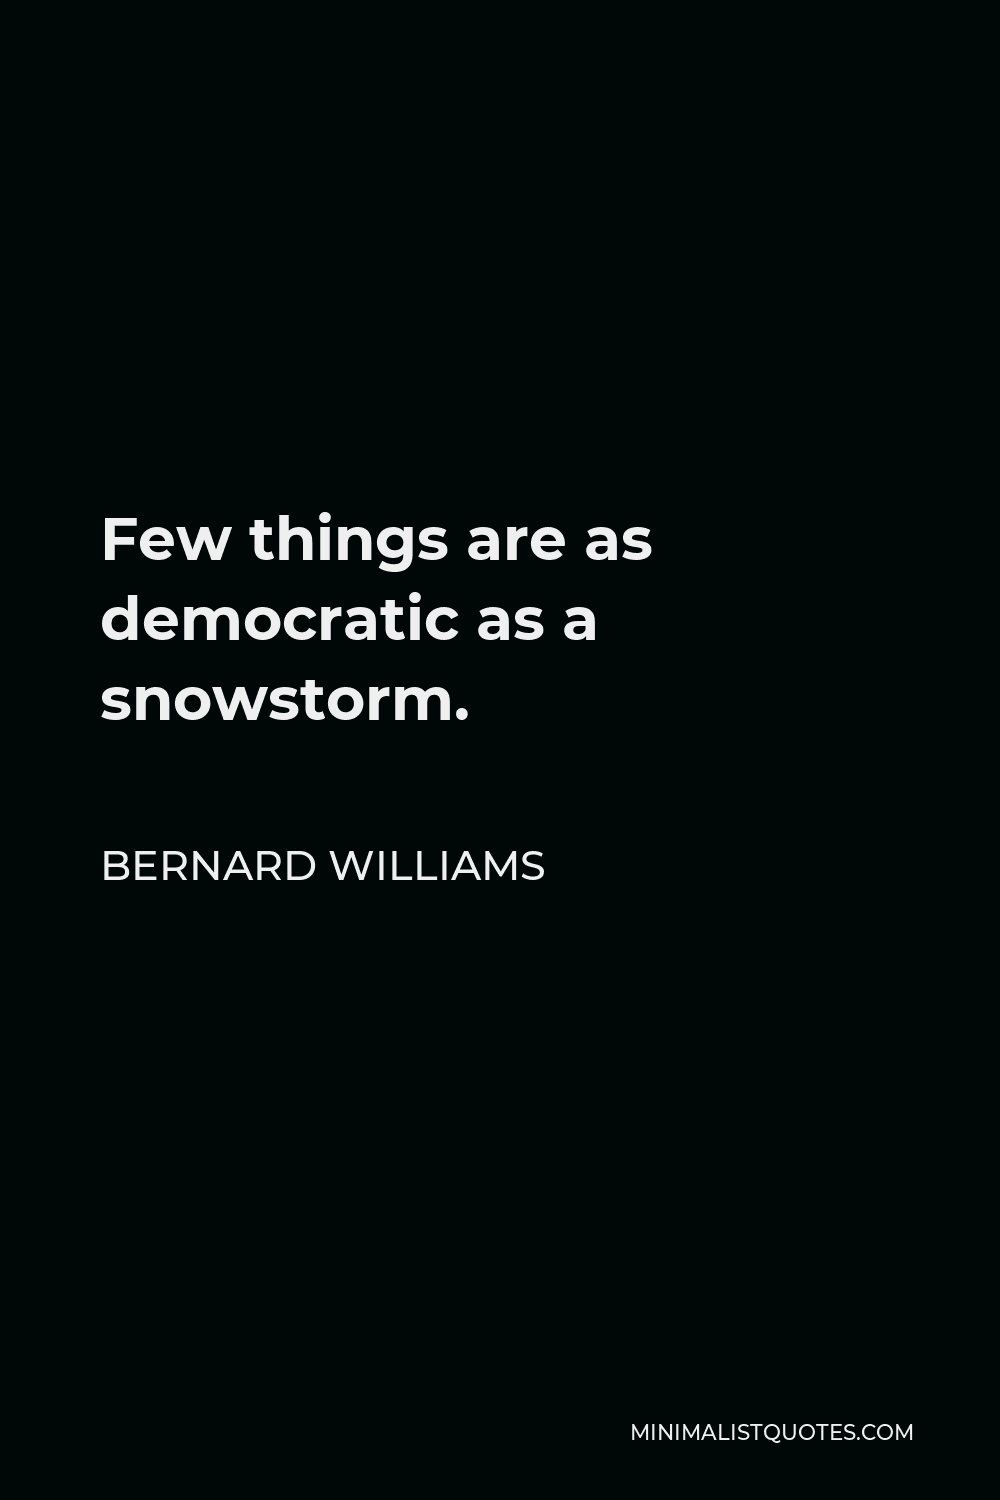 Bernard Williams Quote - Few things are as democratic as a snowstorm.